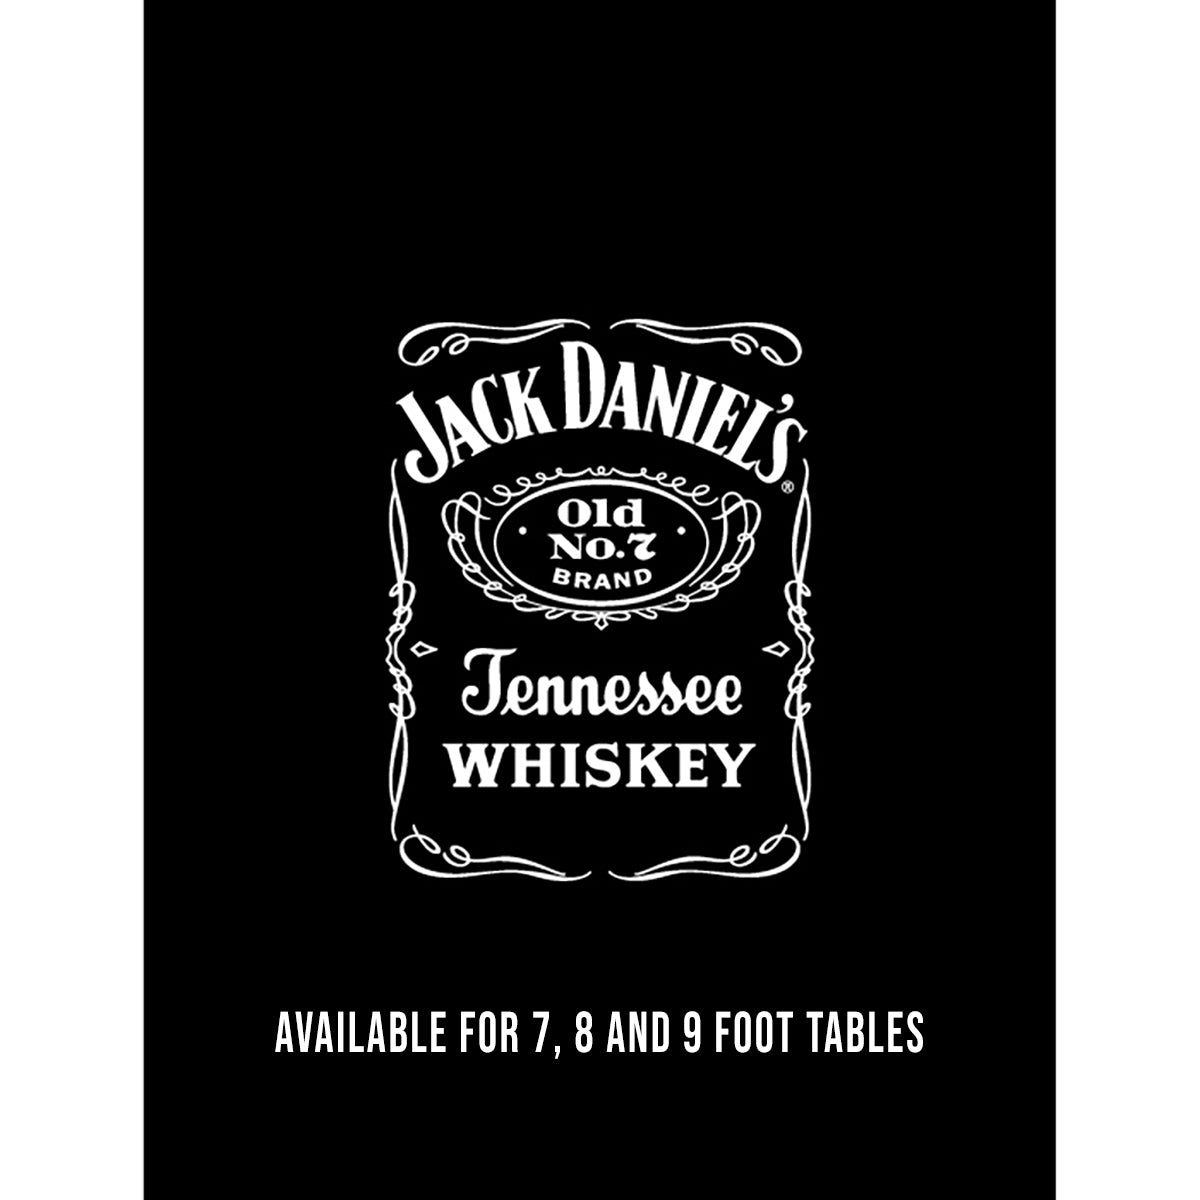 Make a bold statement about your love of Tennessee Whiskey with this great Jack Daniel's Billiard cloth. Your friends will feel right at home sipping their Jack while shooting 8 ball across the famous Jack Daniel's bottle label logo.